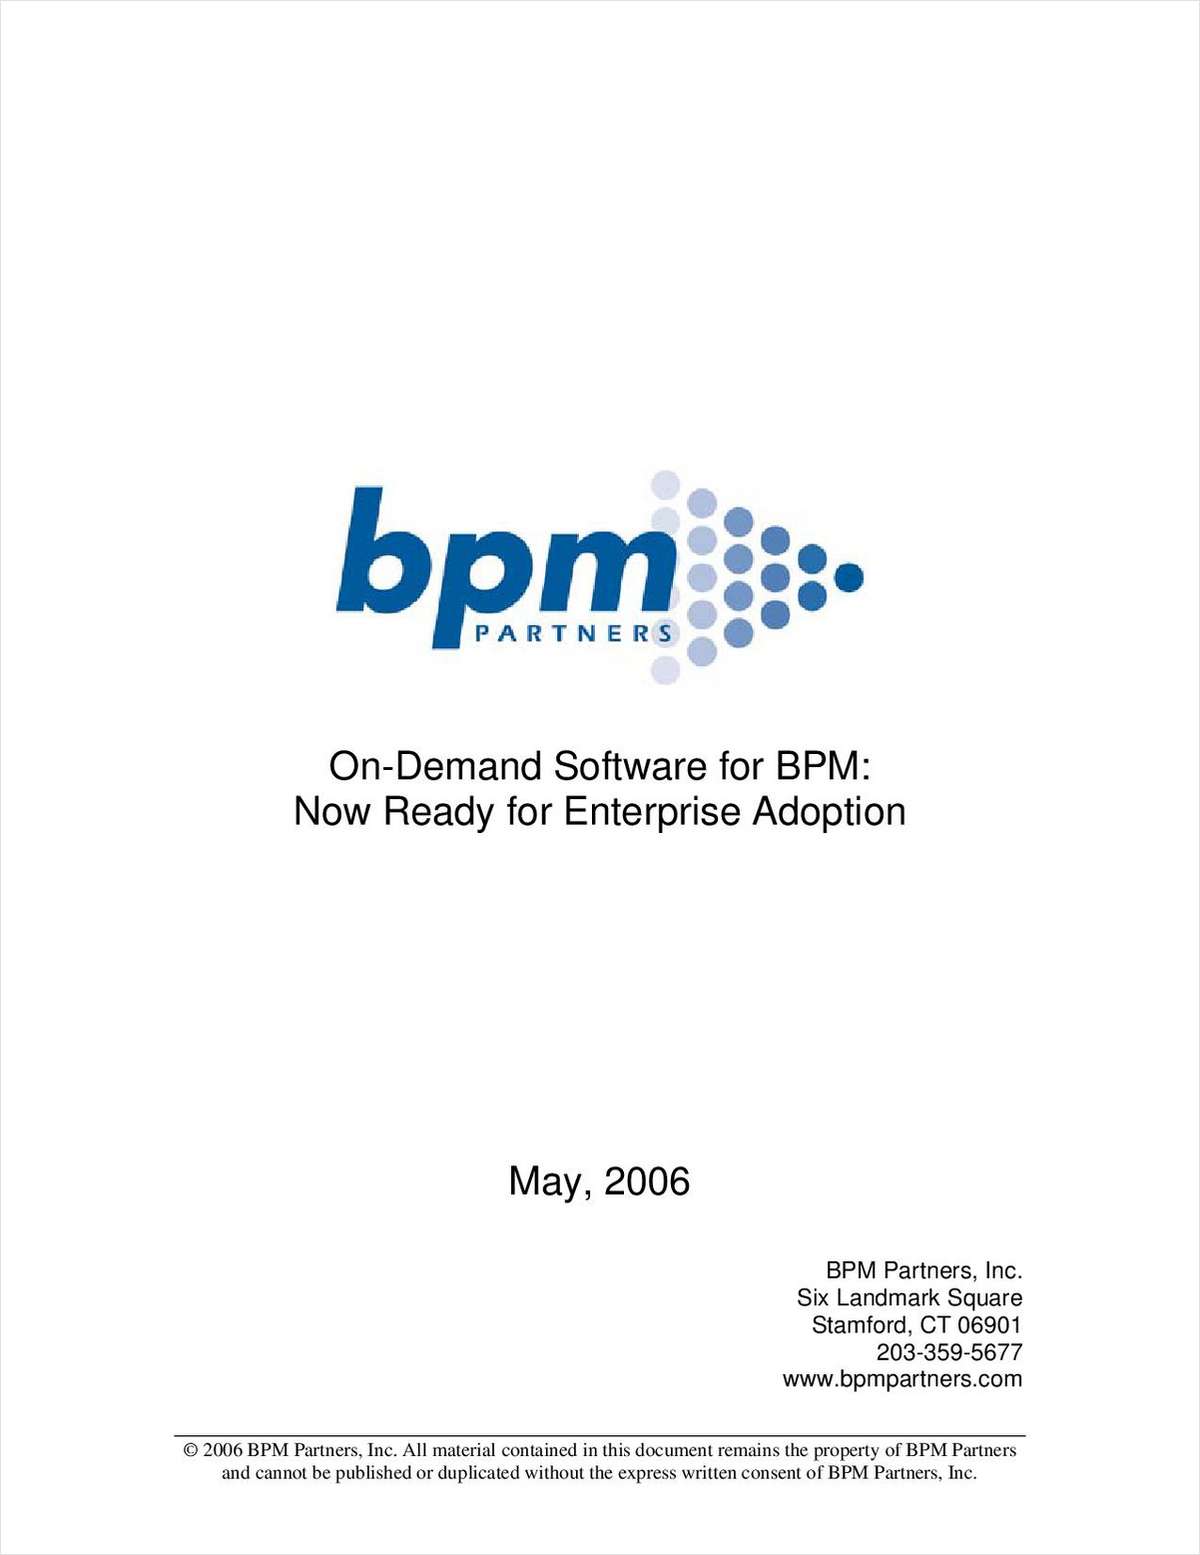 On-Demand Software for BPM: Now Ready for Enterprise Adoption